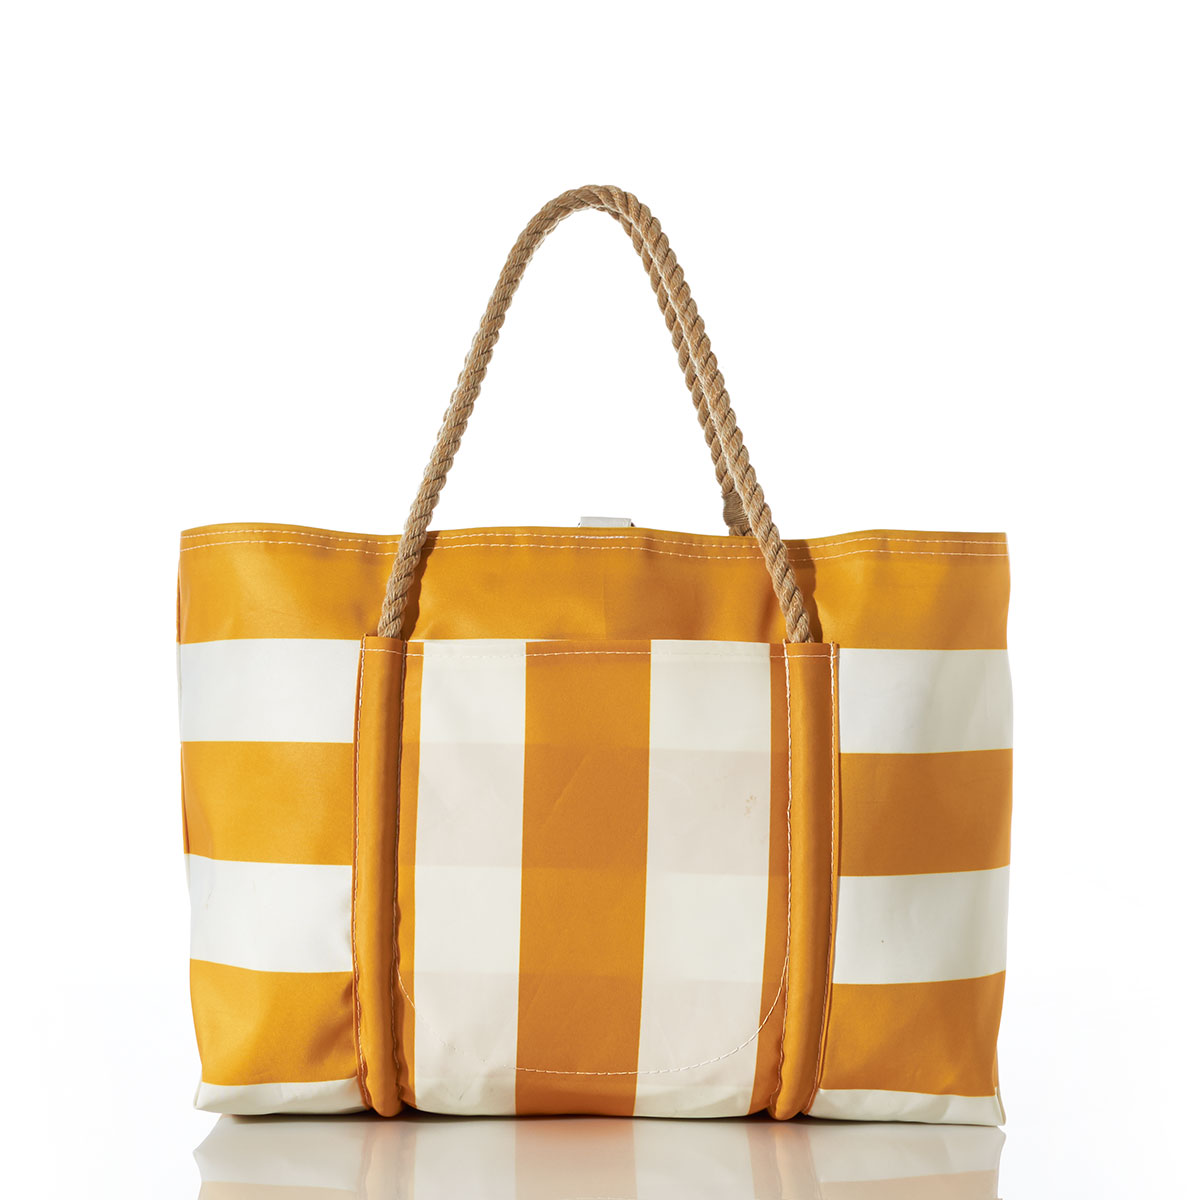 back view: yellow and white plaid stripes adorn the front of a recycled sail cloth tote with hemp rope handles and a top metal clasp